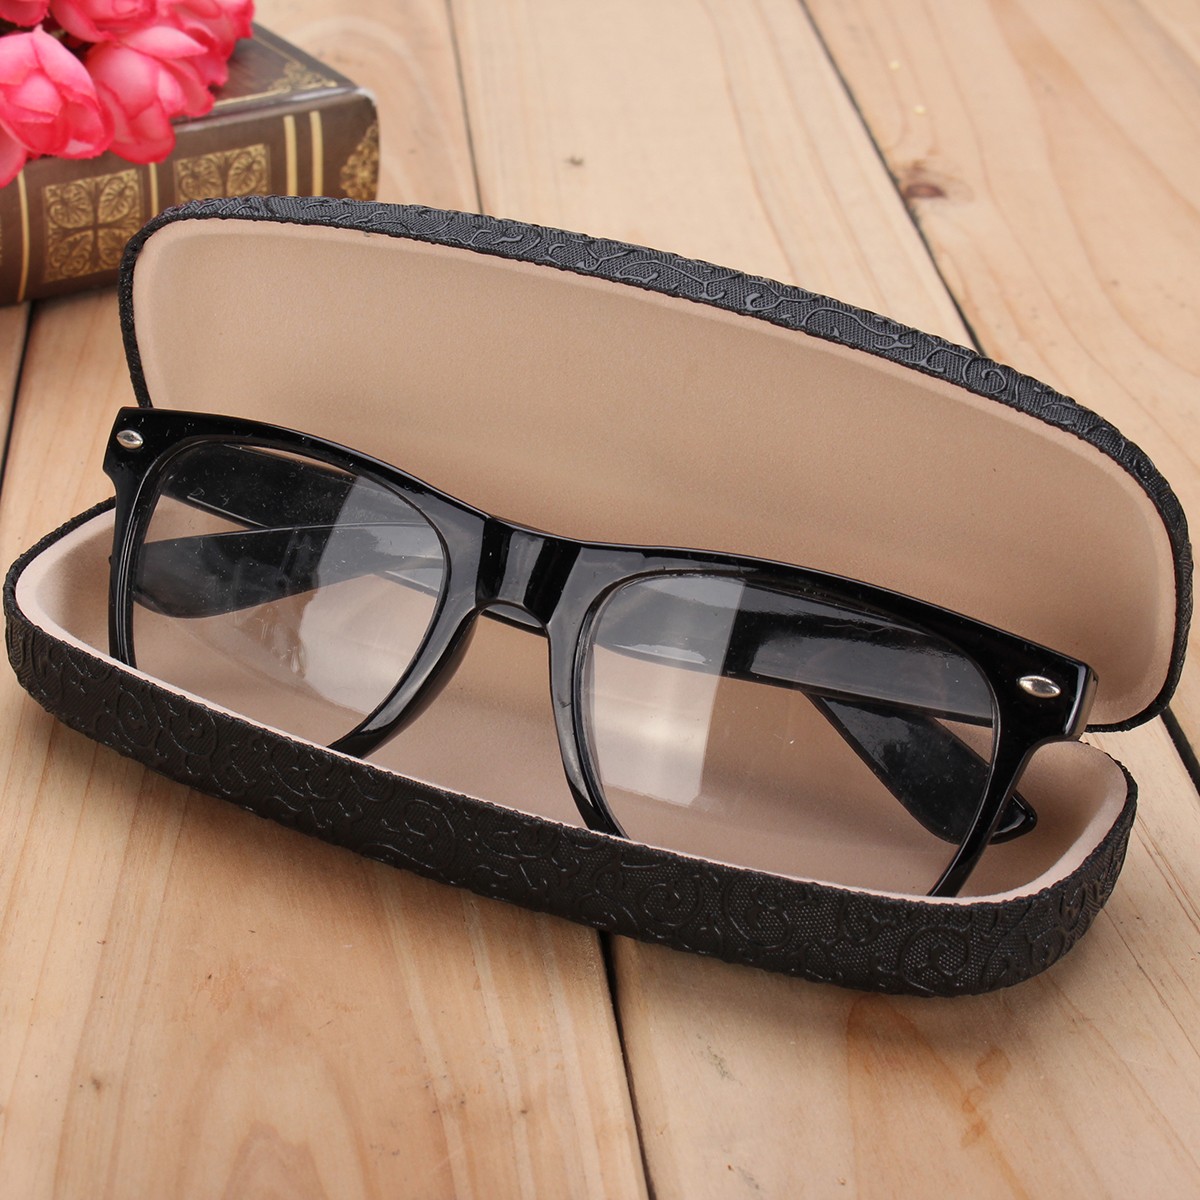 Vintage-Hard-Sunglass-Glasses-Box-Lace-Pattern-Reading-Glasses-Storage-Spectacle-Glasses-Case-1028007